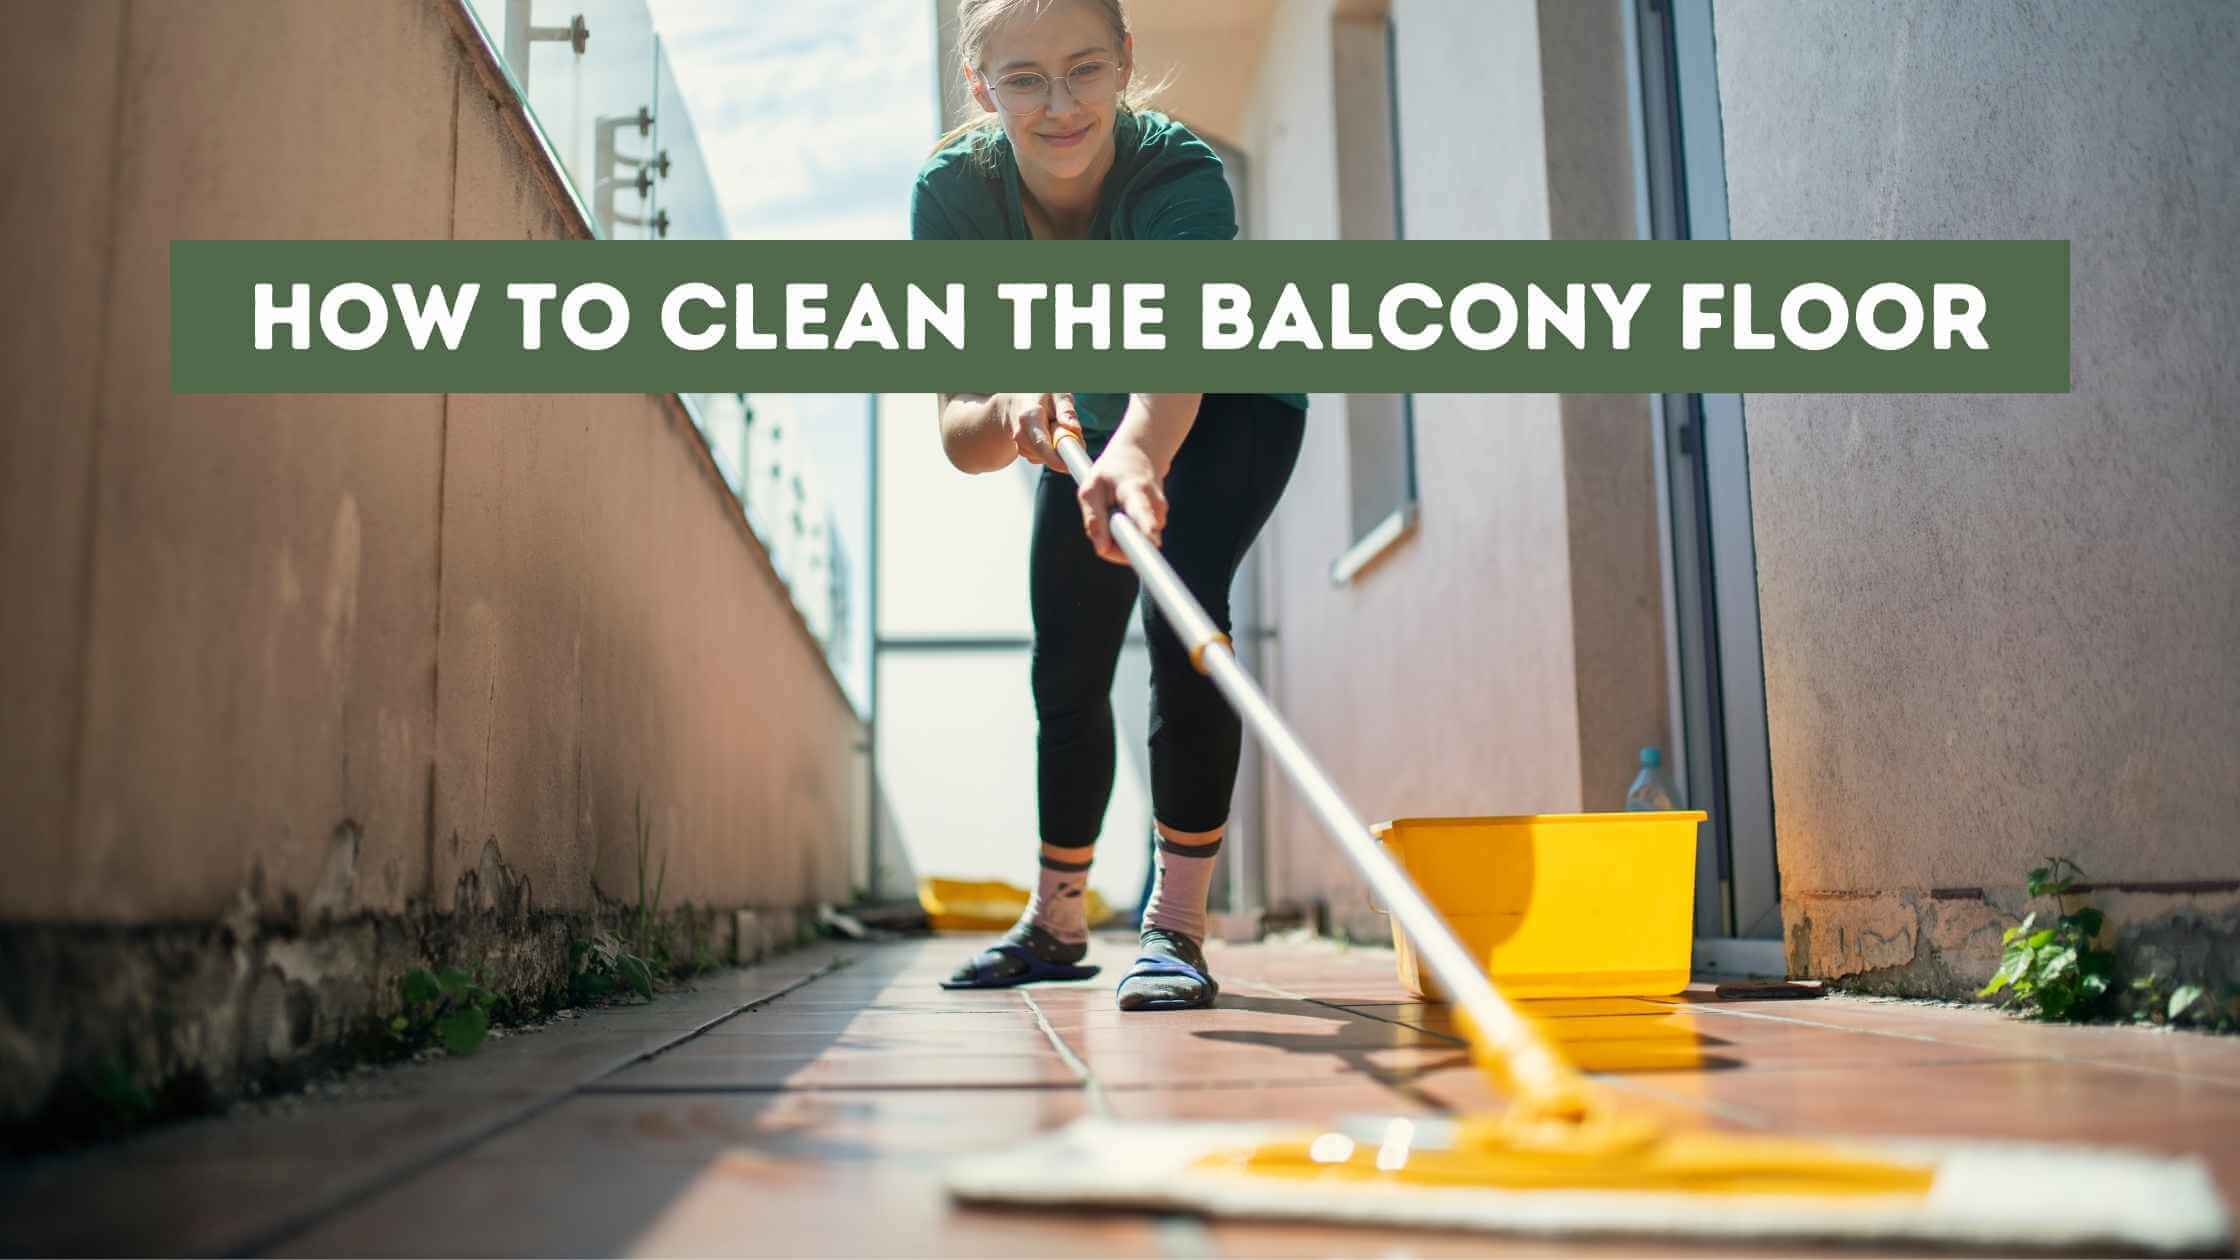 How To Clean The Balcony Floor